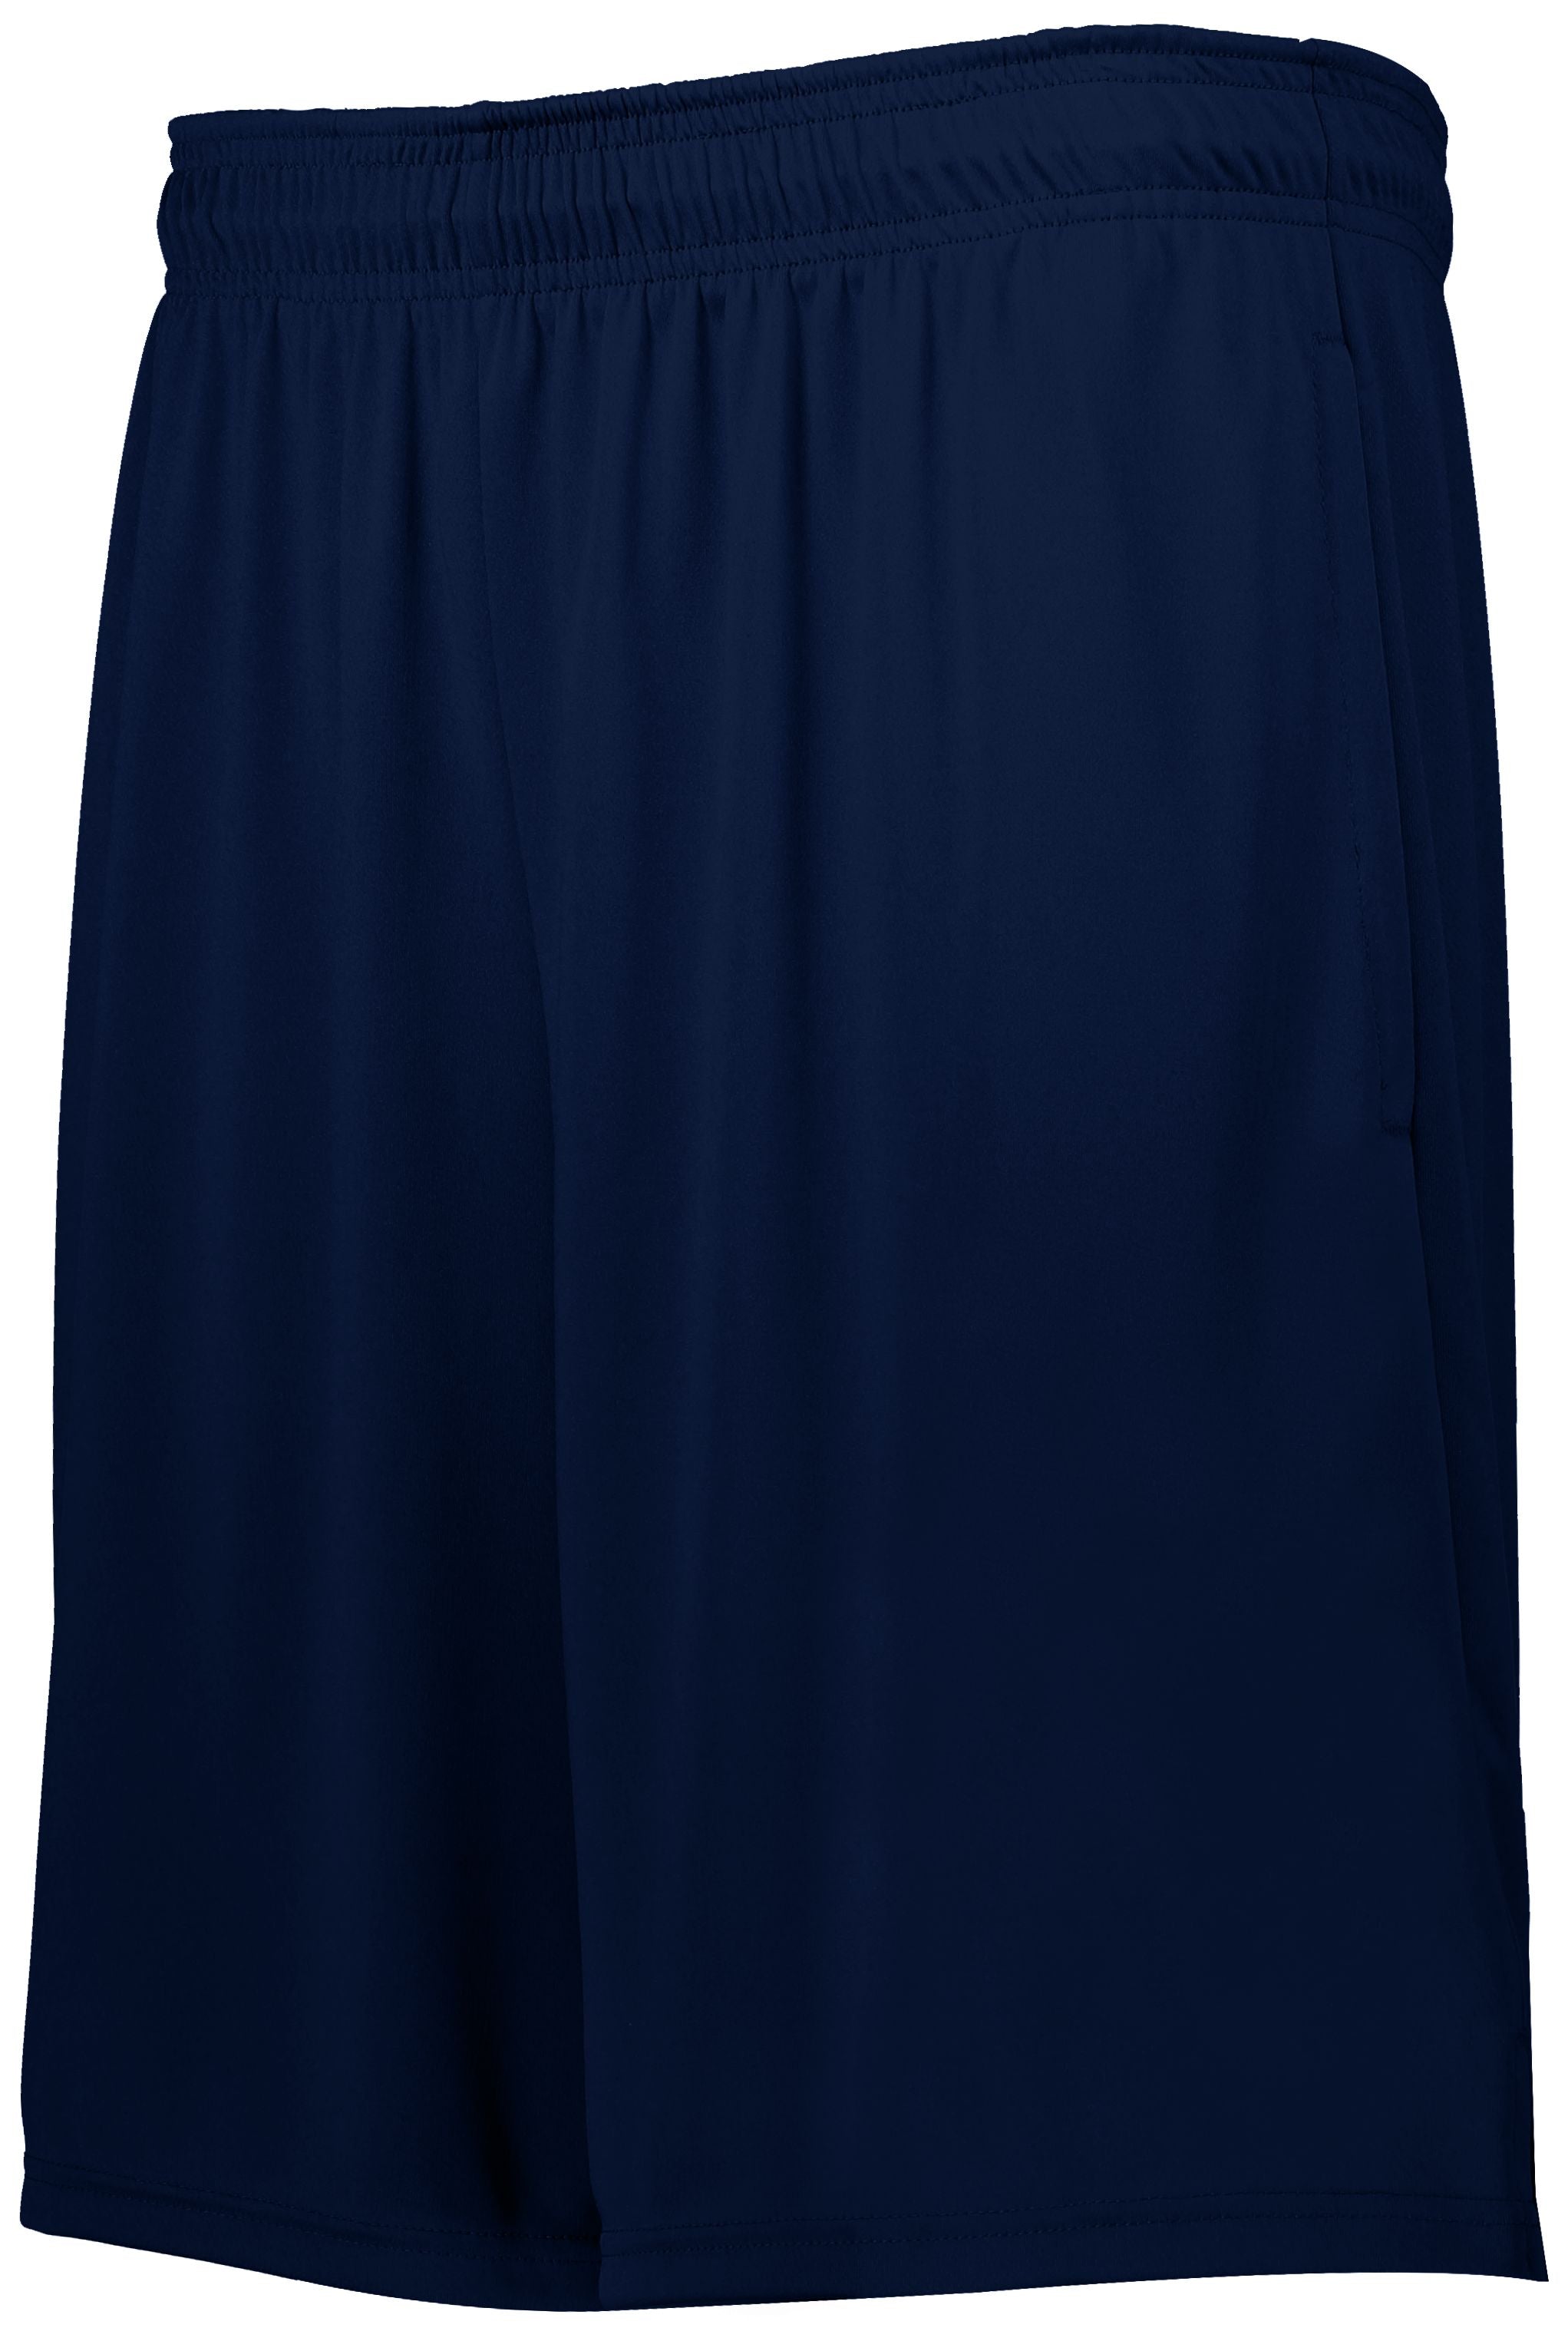 Holloway Whisk 2.0 Shorts in Navy  -Part of the Adult, Adult-Shorts, Holloway product lines at KanaleyCreations.com